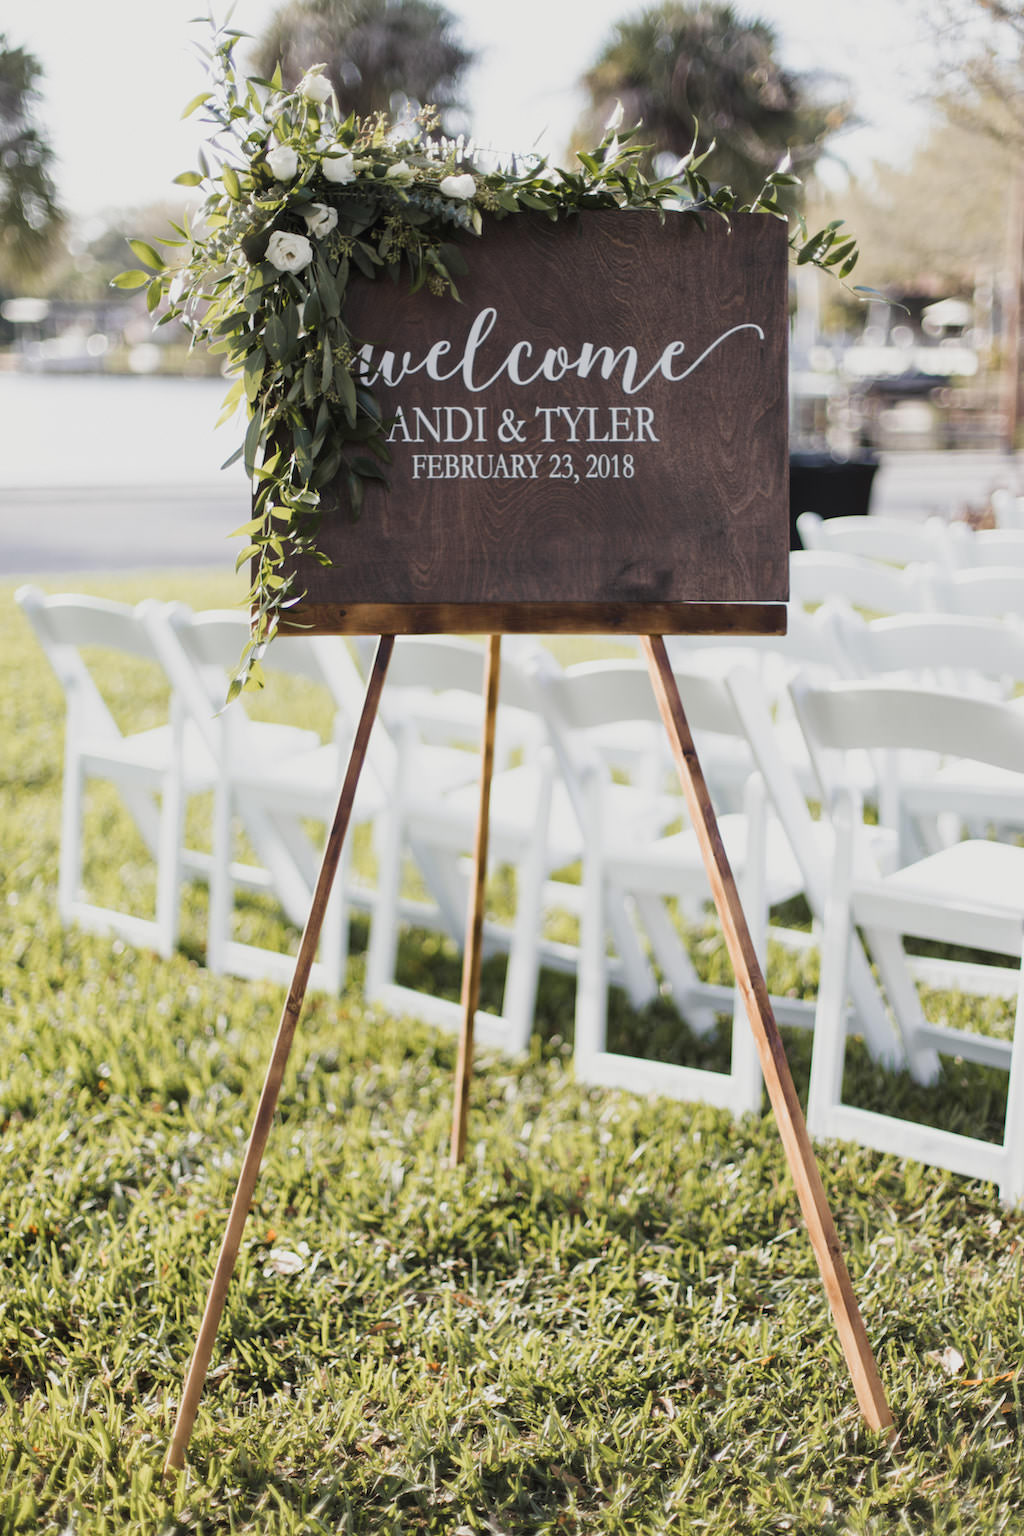 Garden Inspired Wedding Ceremony Decor, Wooden Welcome Sign with Greenery and White Floral Garland | St. Petersburg Woman’s Club